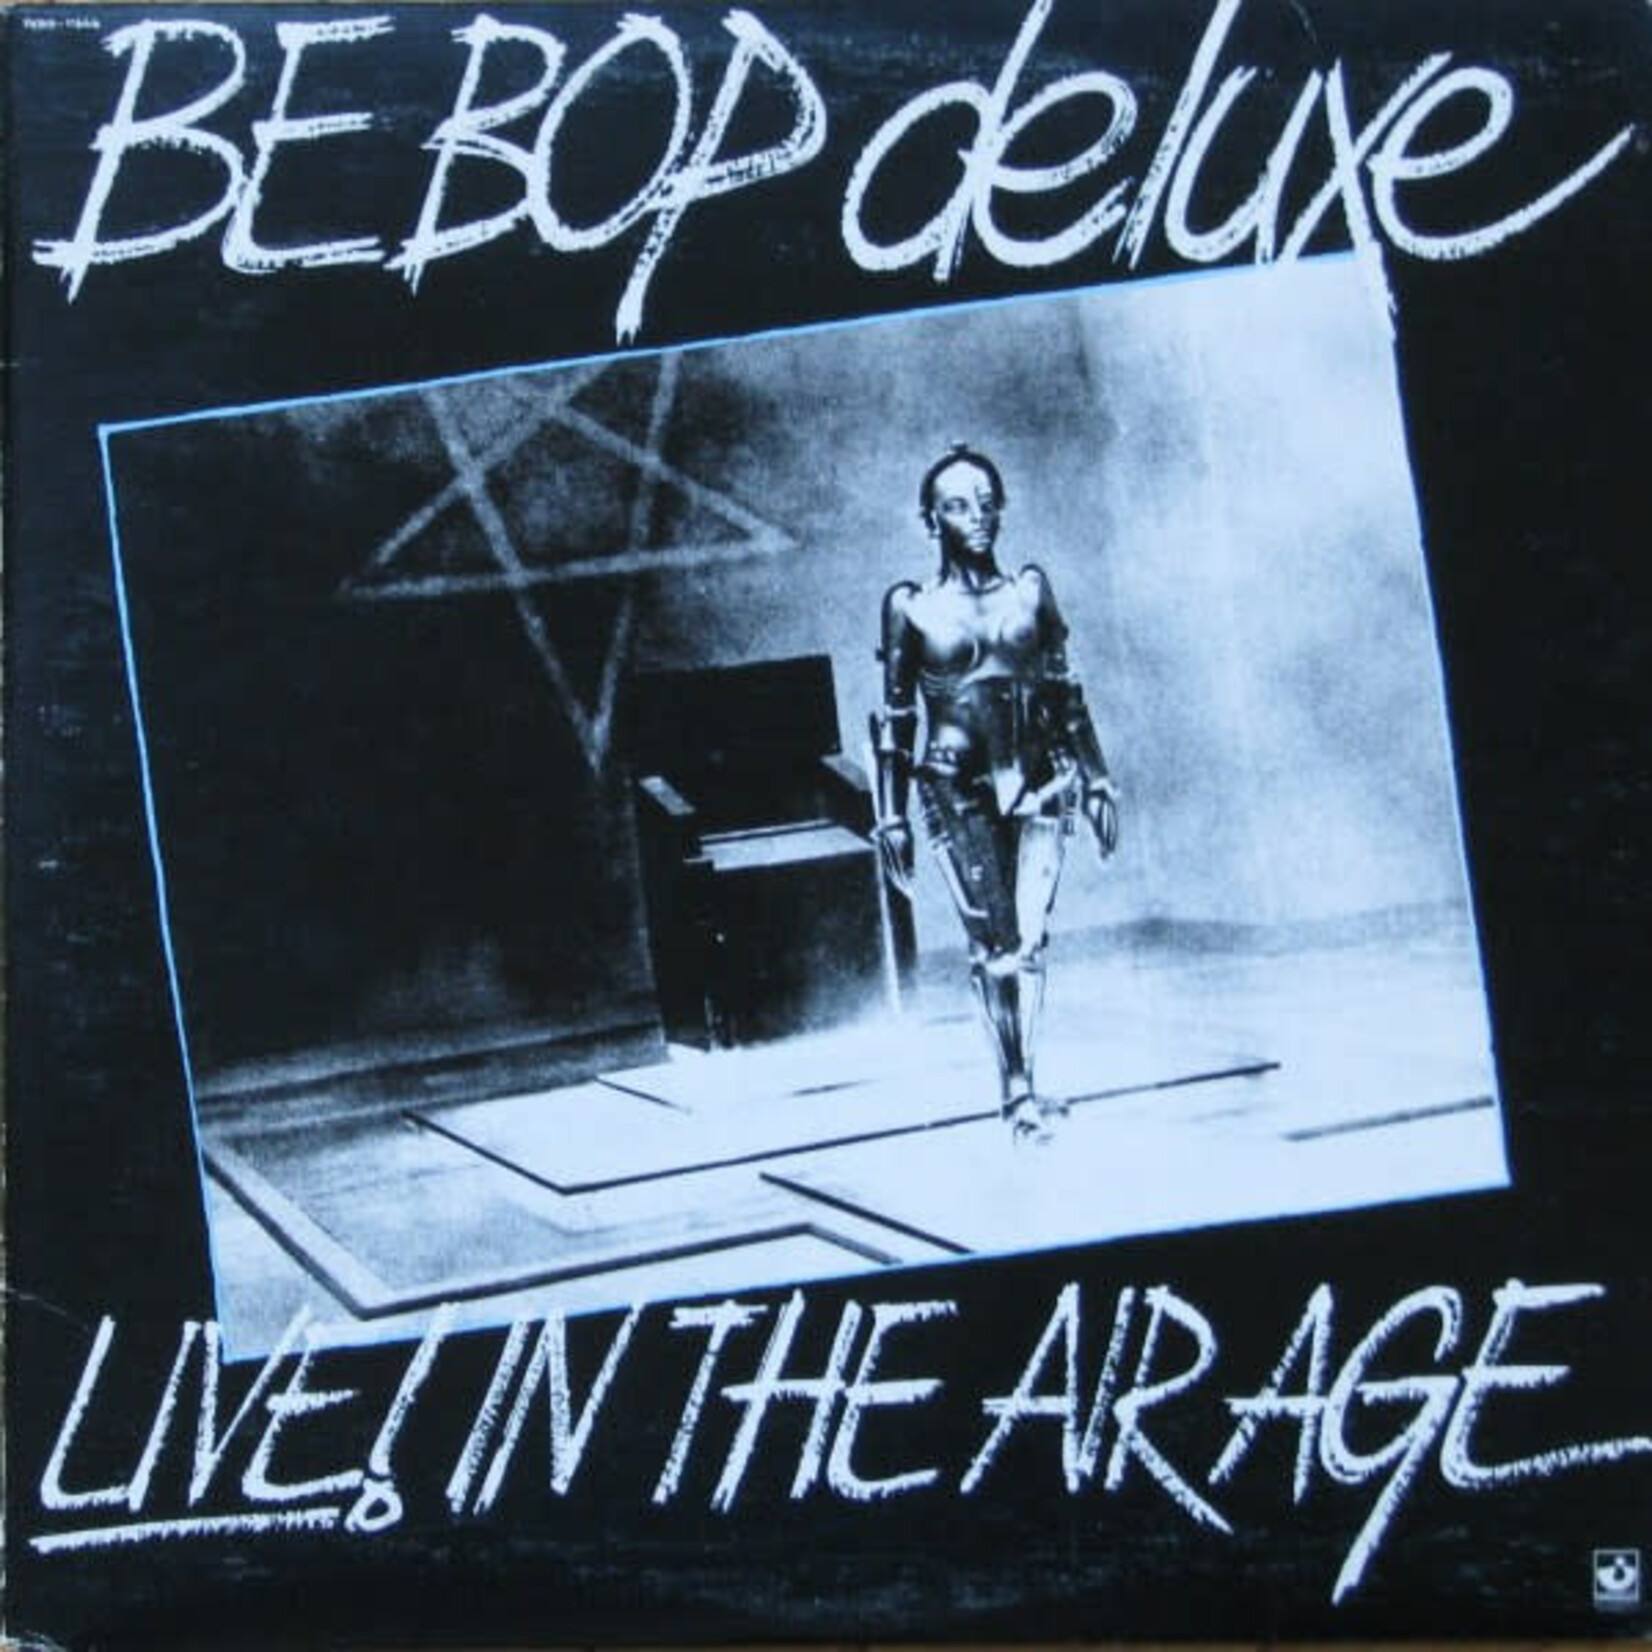 Be Bop Deluxe – Live! In The Air Age (G, 2LP, SKBB 11666)